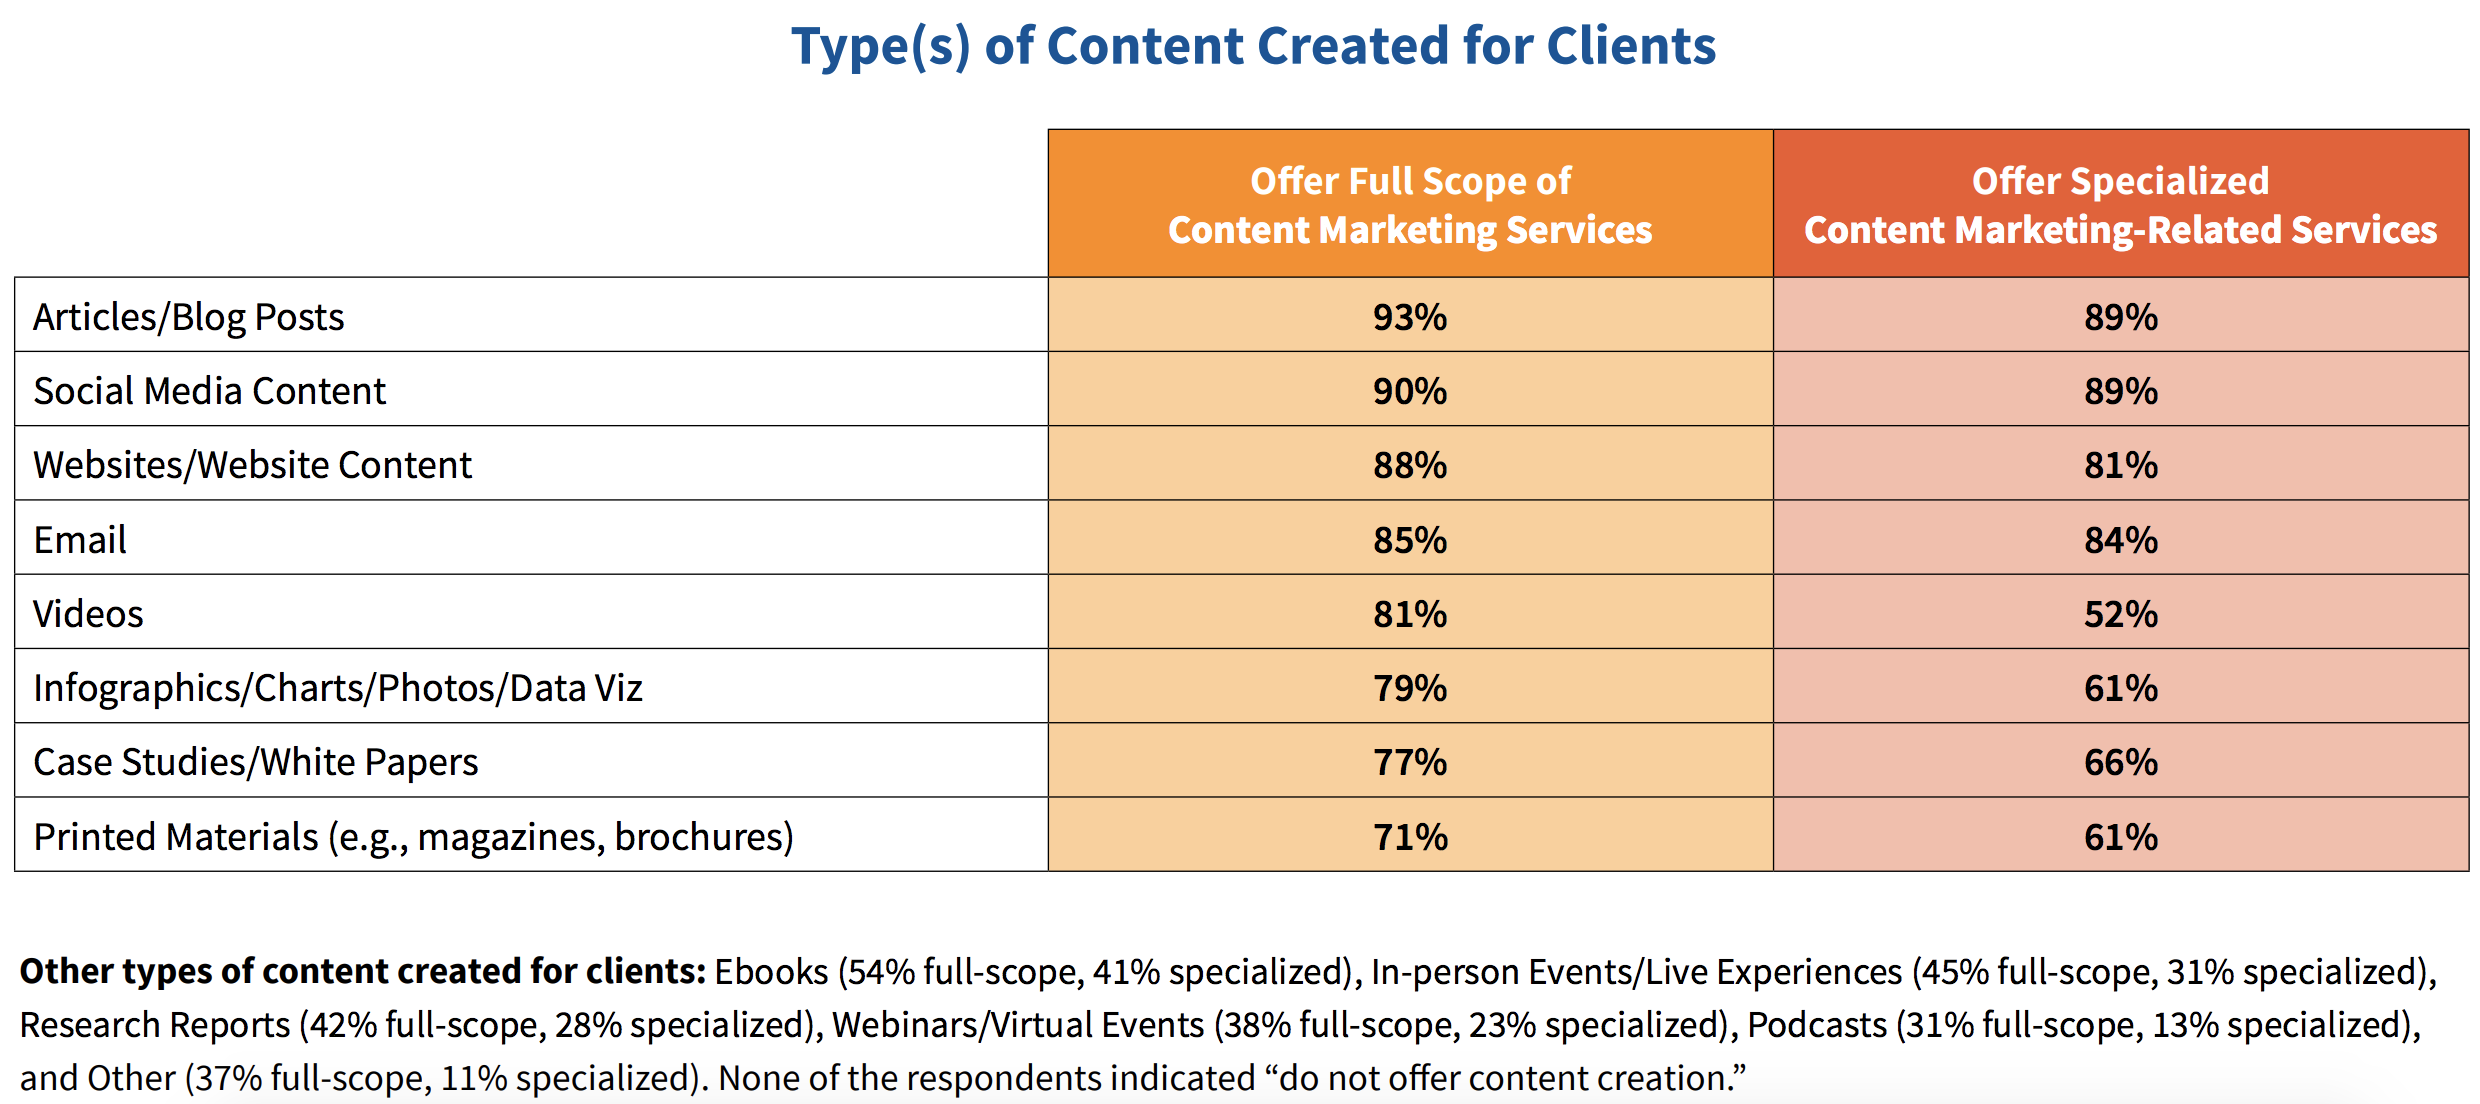 types of content agencies create for clients